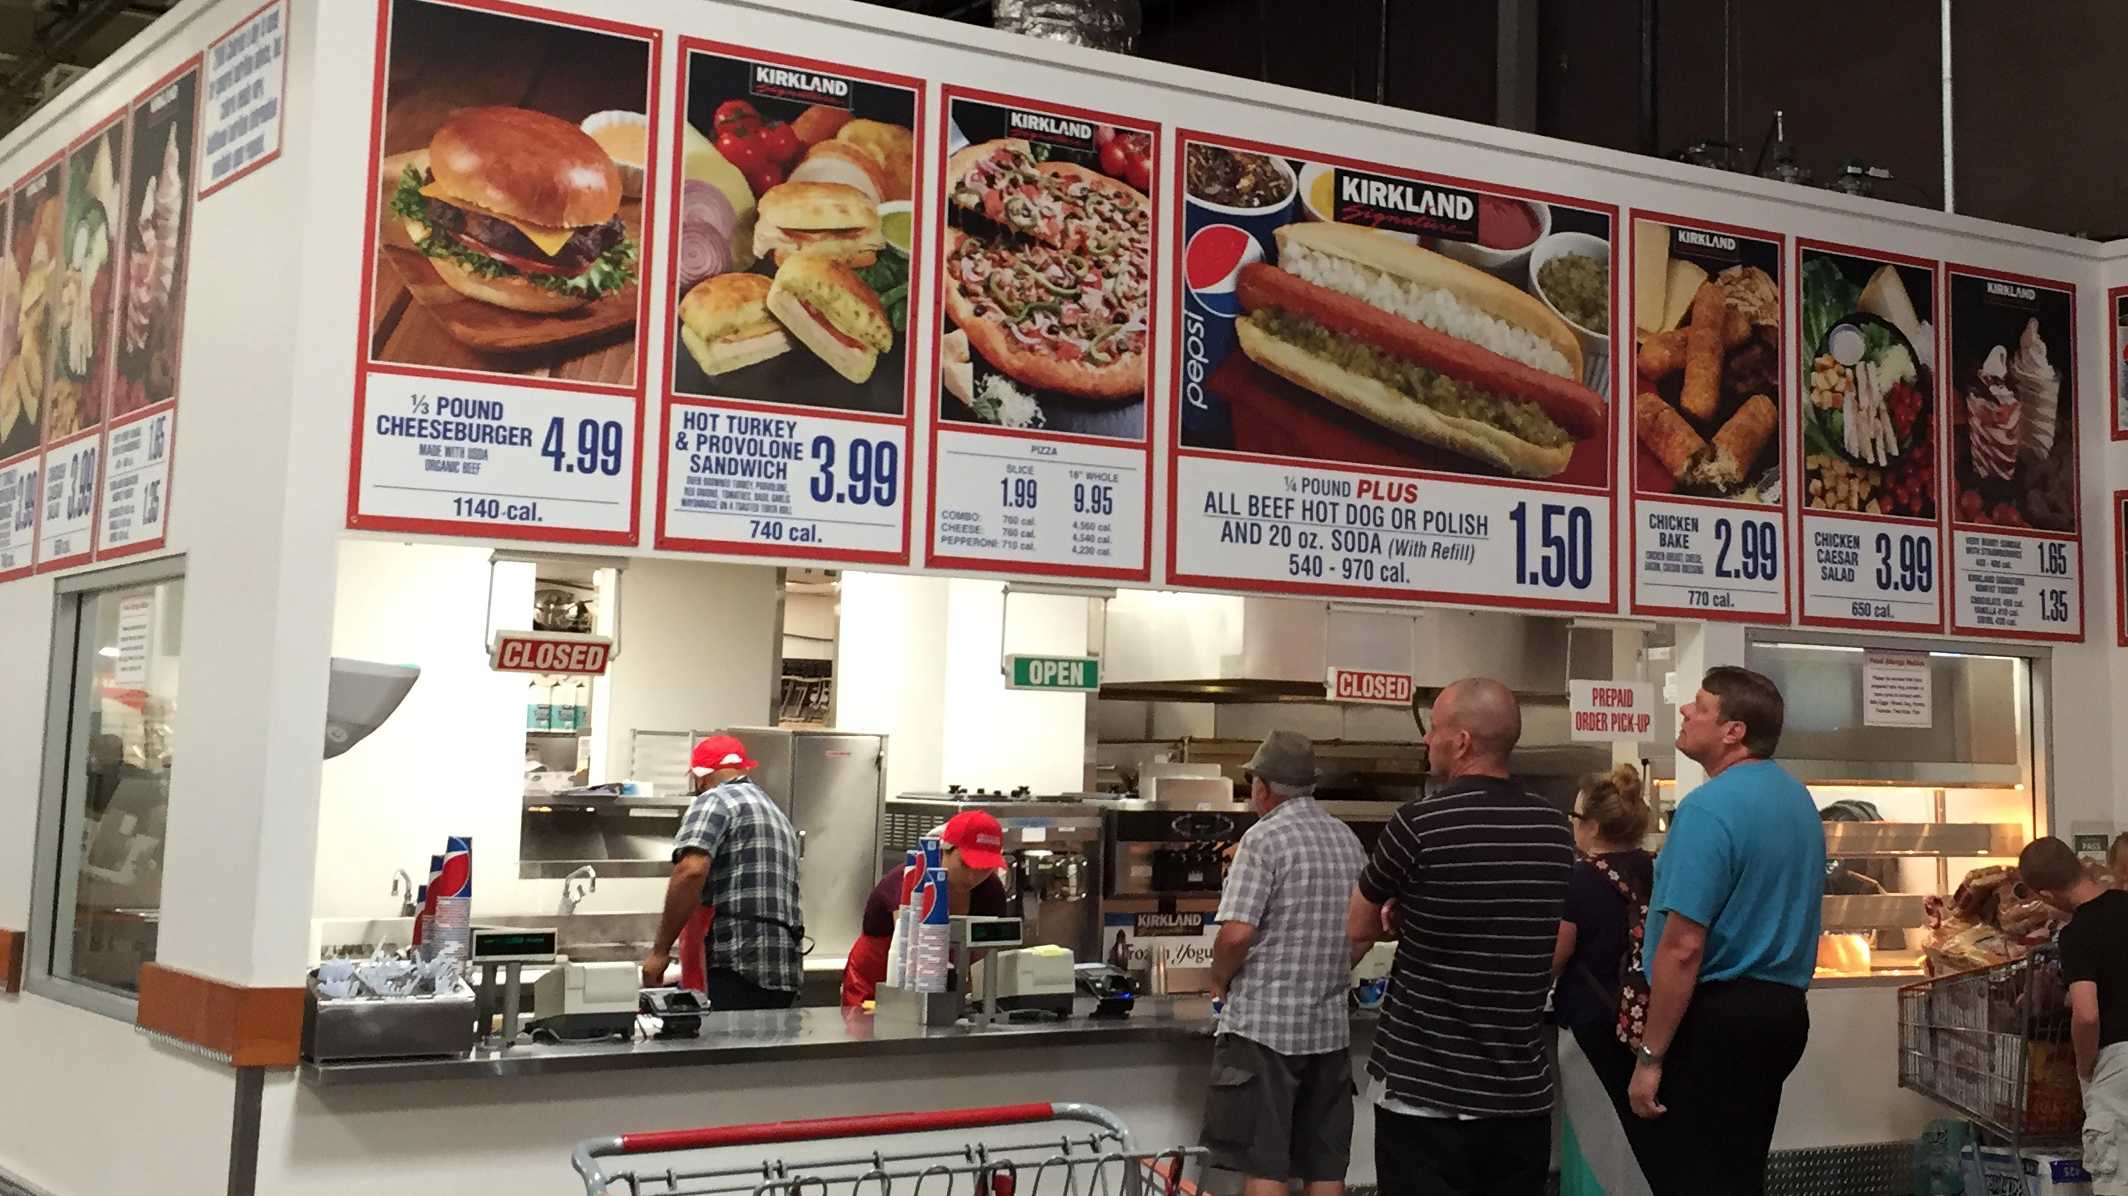 I drove 30 minutes to try Costco's burger and here's the deal